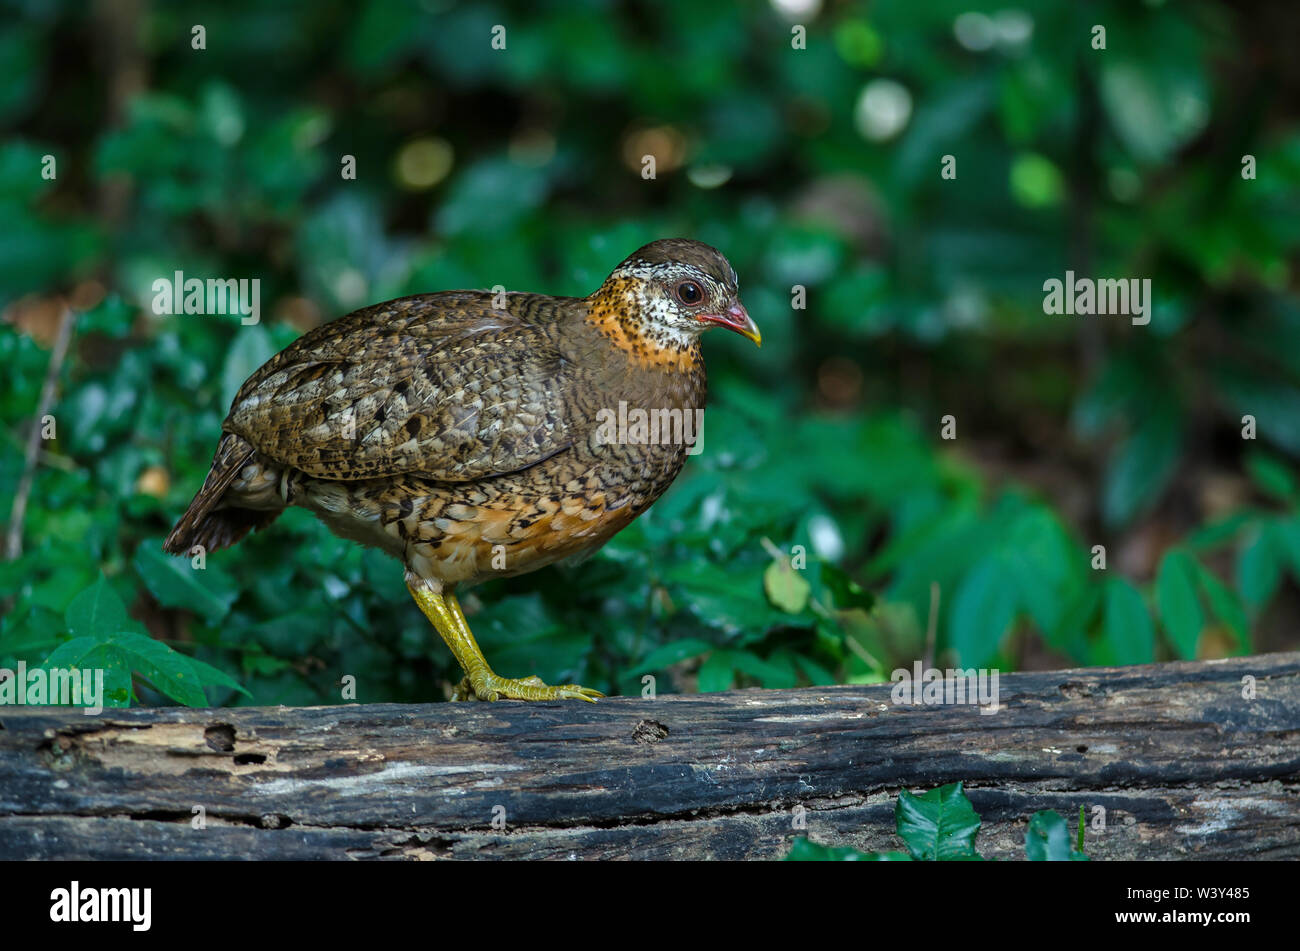 Green-legged partridge, Scaly-breasted partridge, Green-legged hill in nature, Thailand Stock Photo